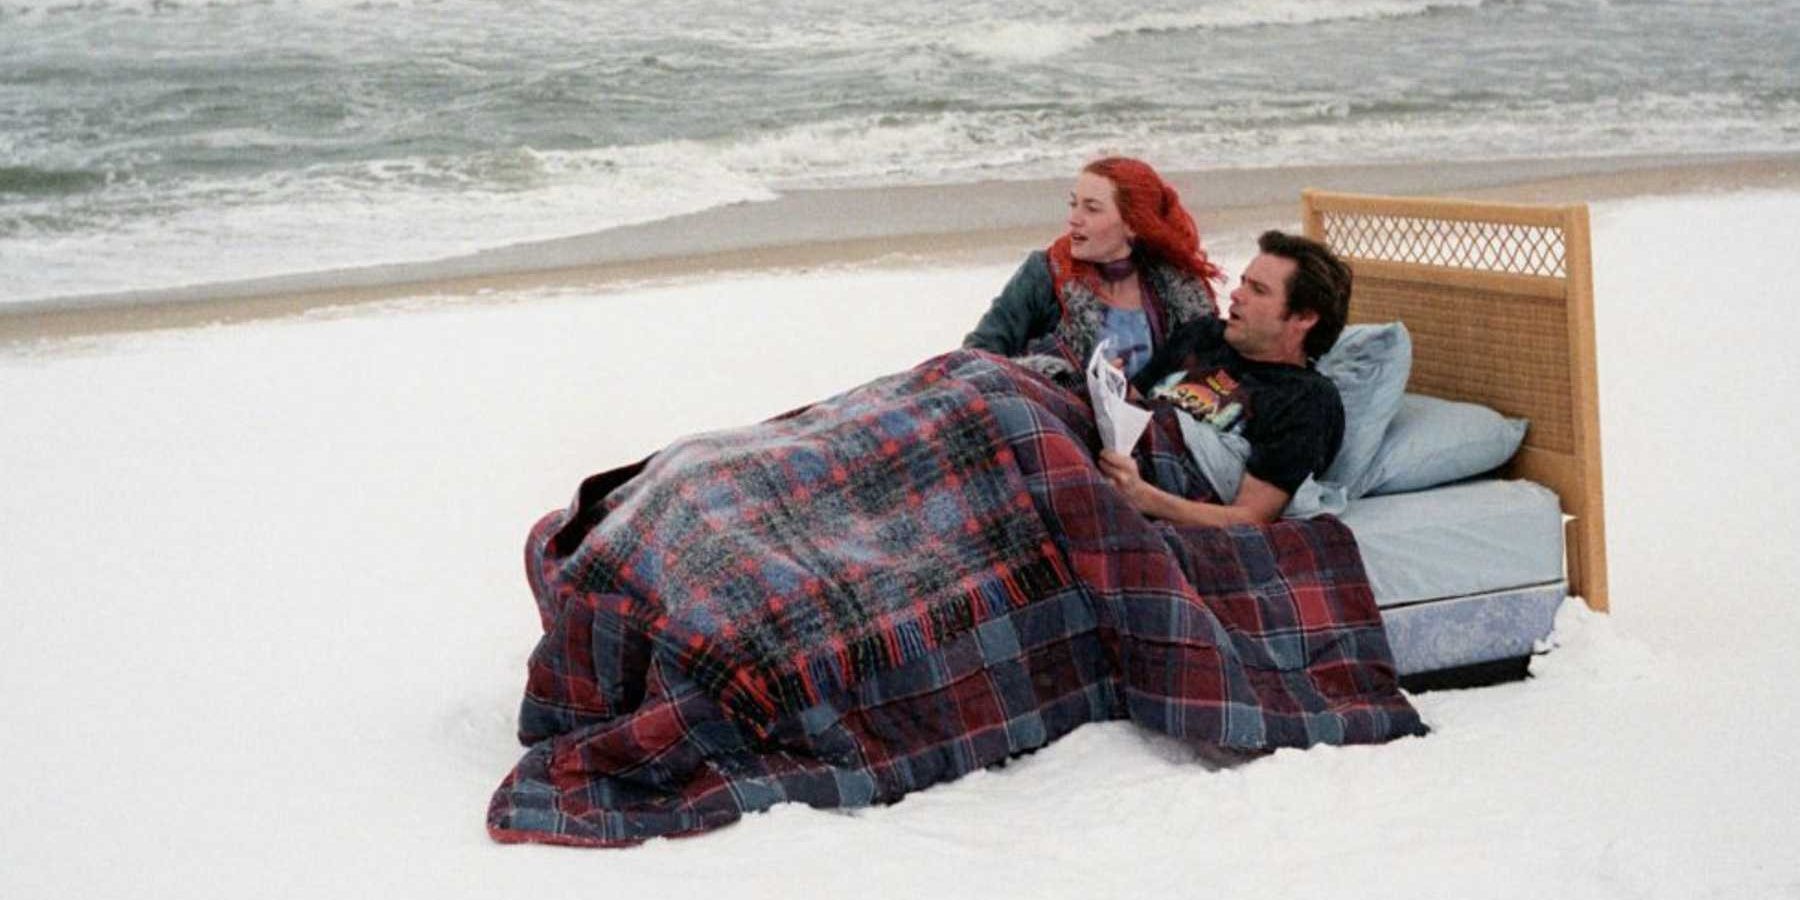 Kate Winslet and Jim Carrey on a bed on a beach in Eternal Sunshine of the Spotless Mind (2004)